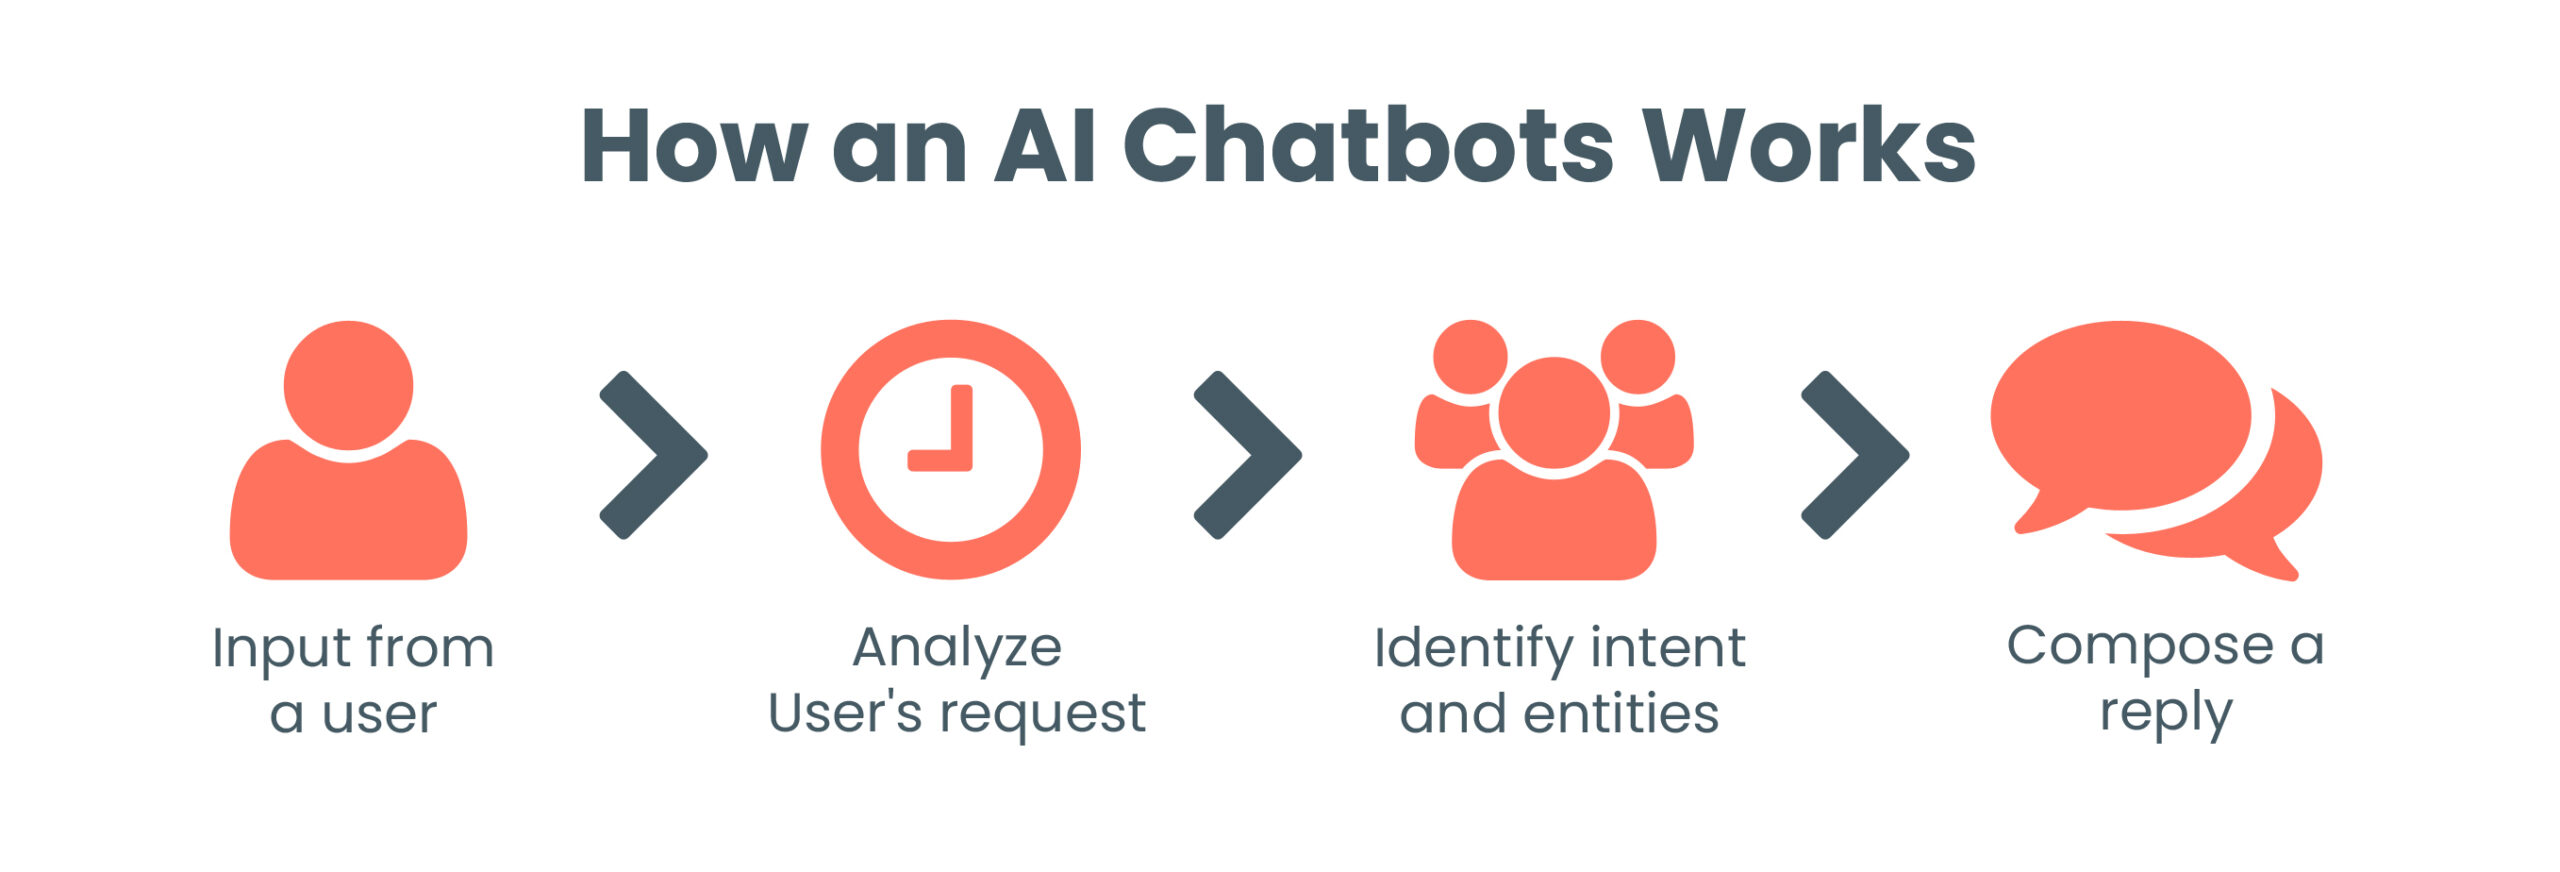 What Is the Process Behind an AI Chatbot?